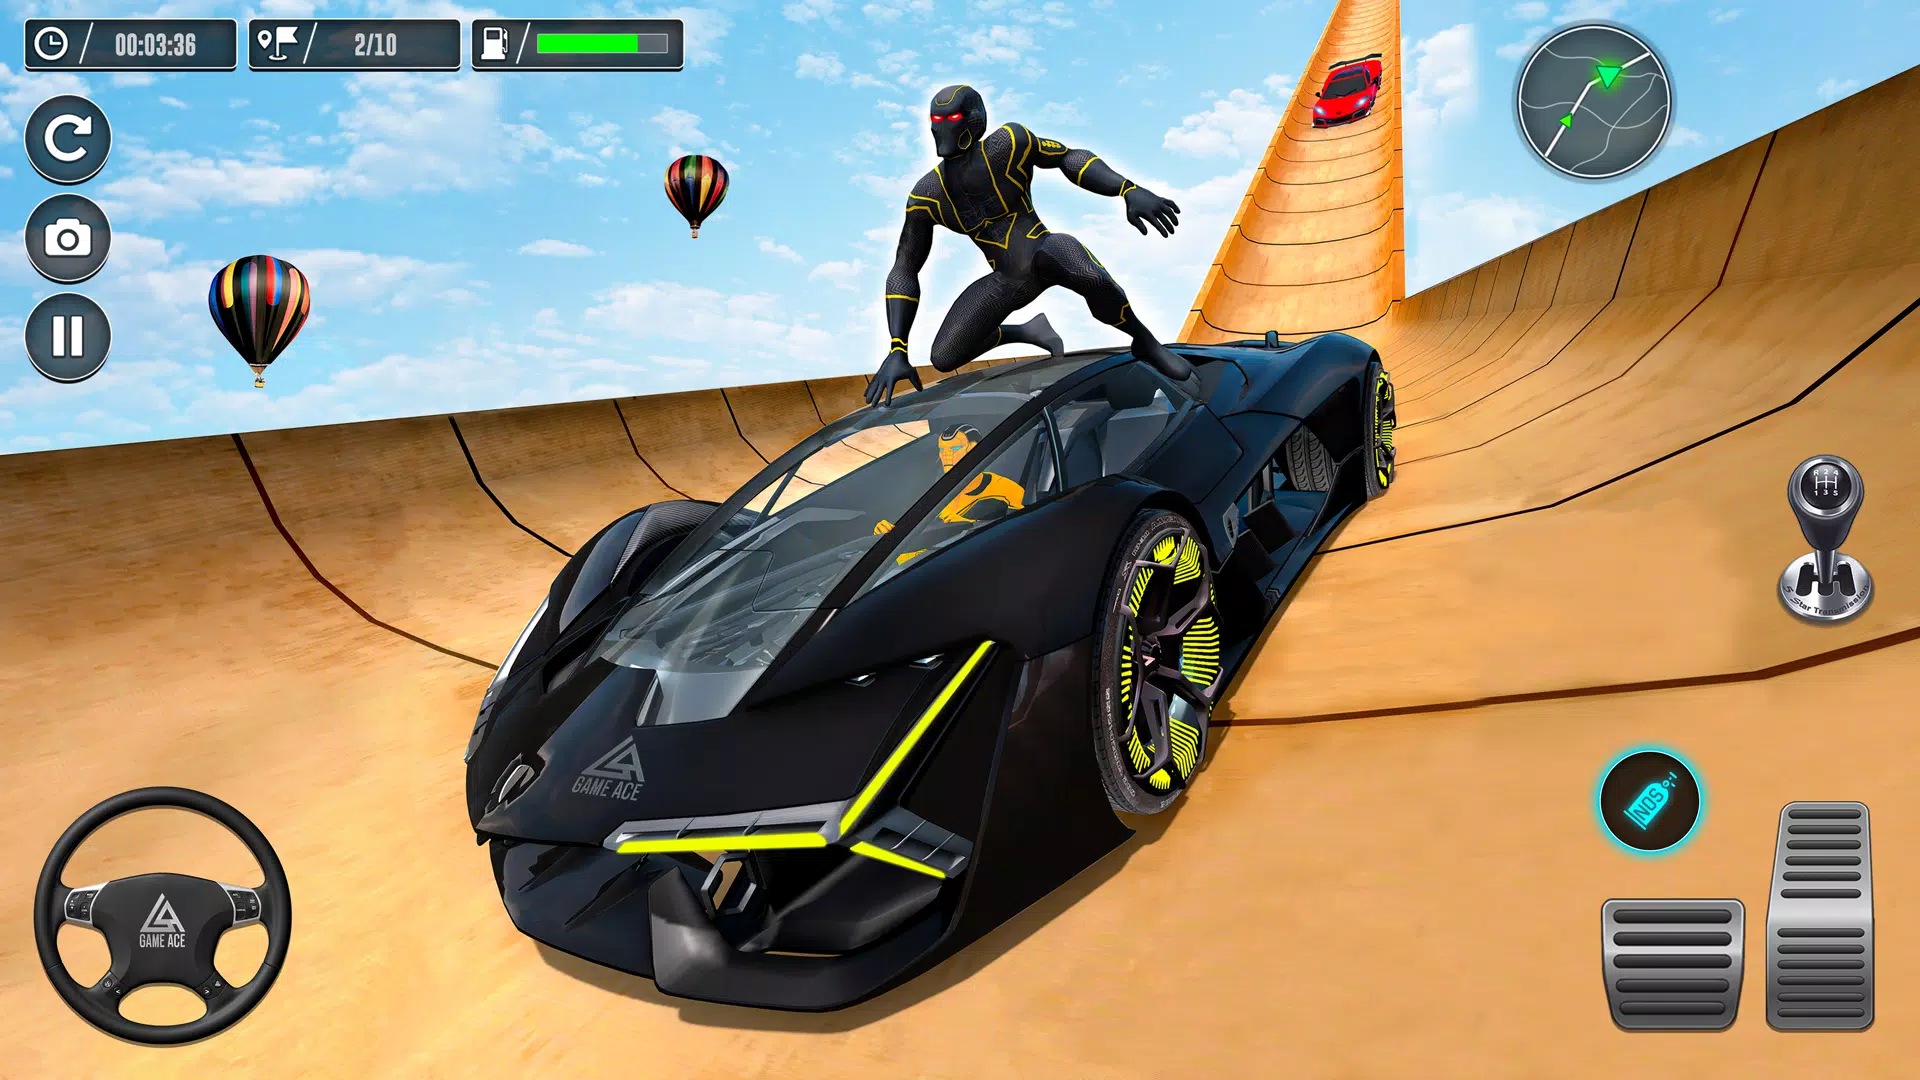 Crazy Car Stunt Driving Games Screenshots on Android 